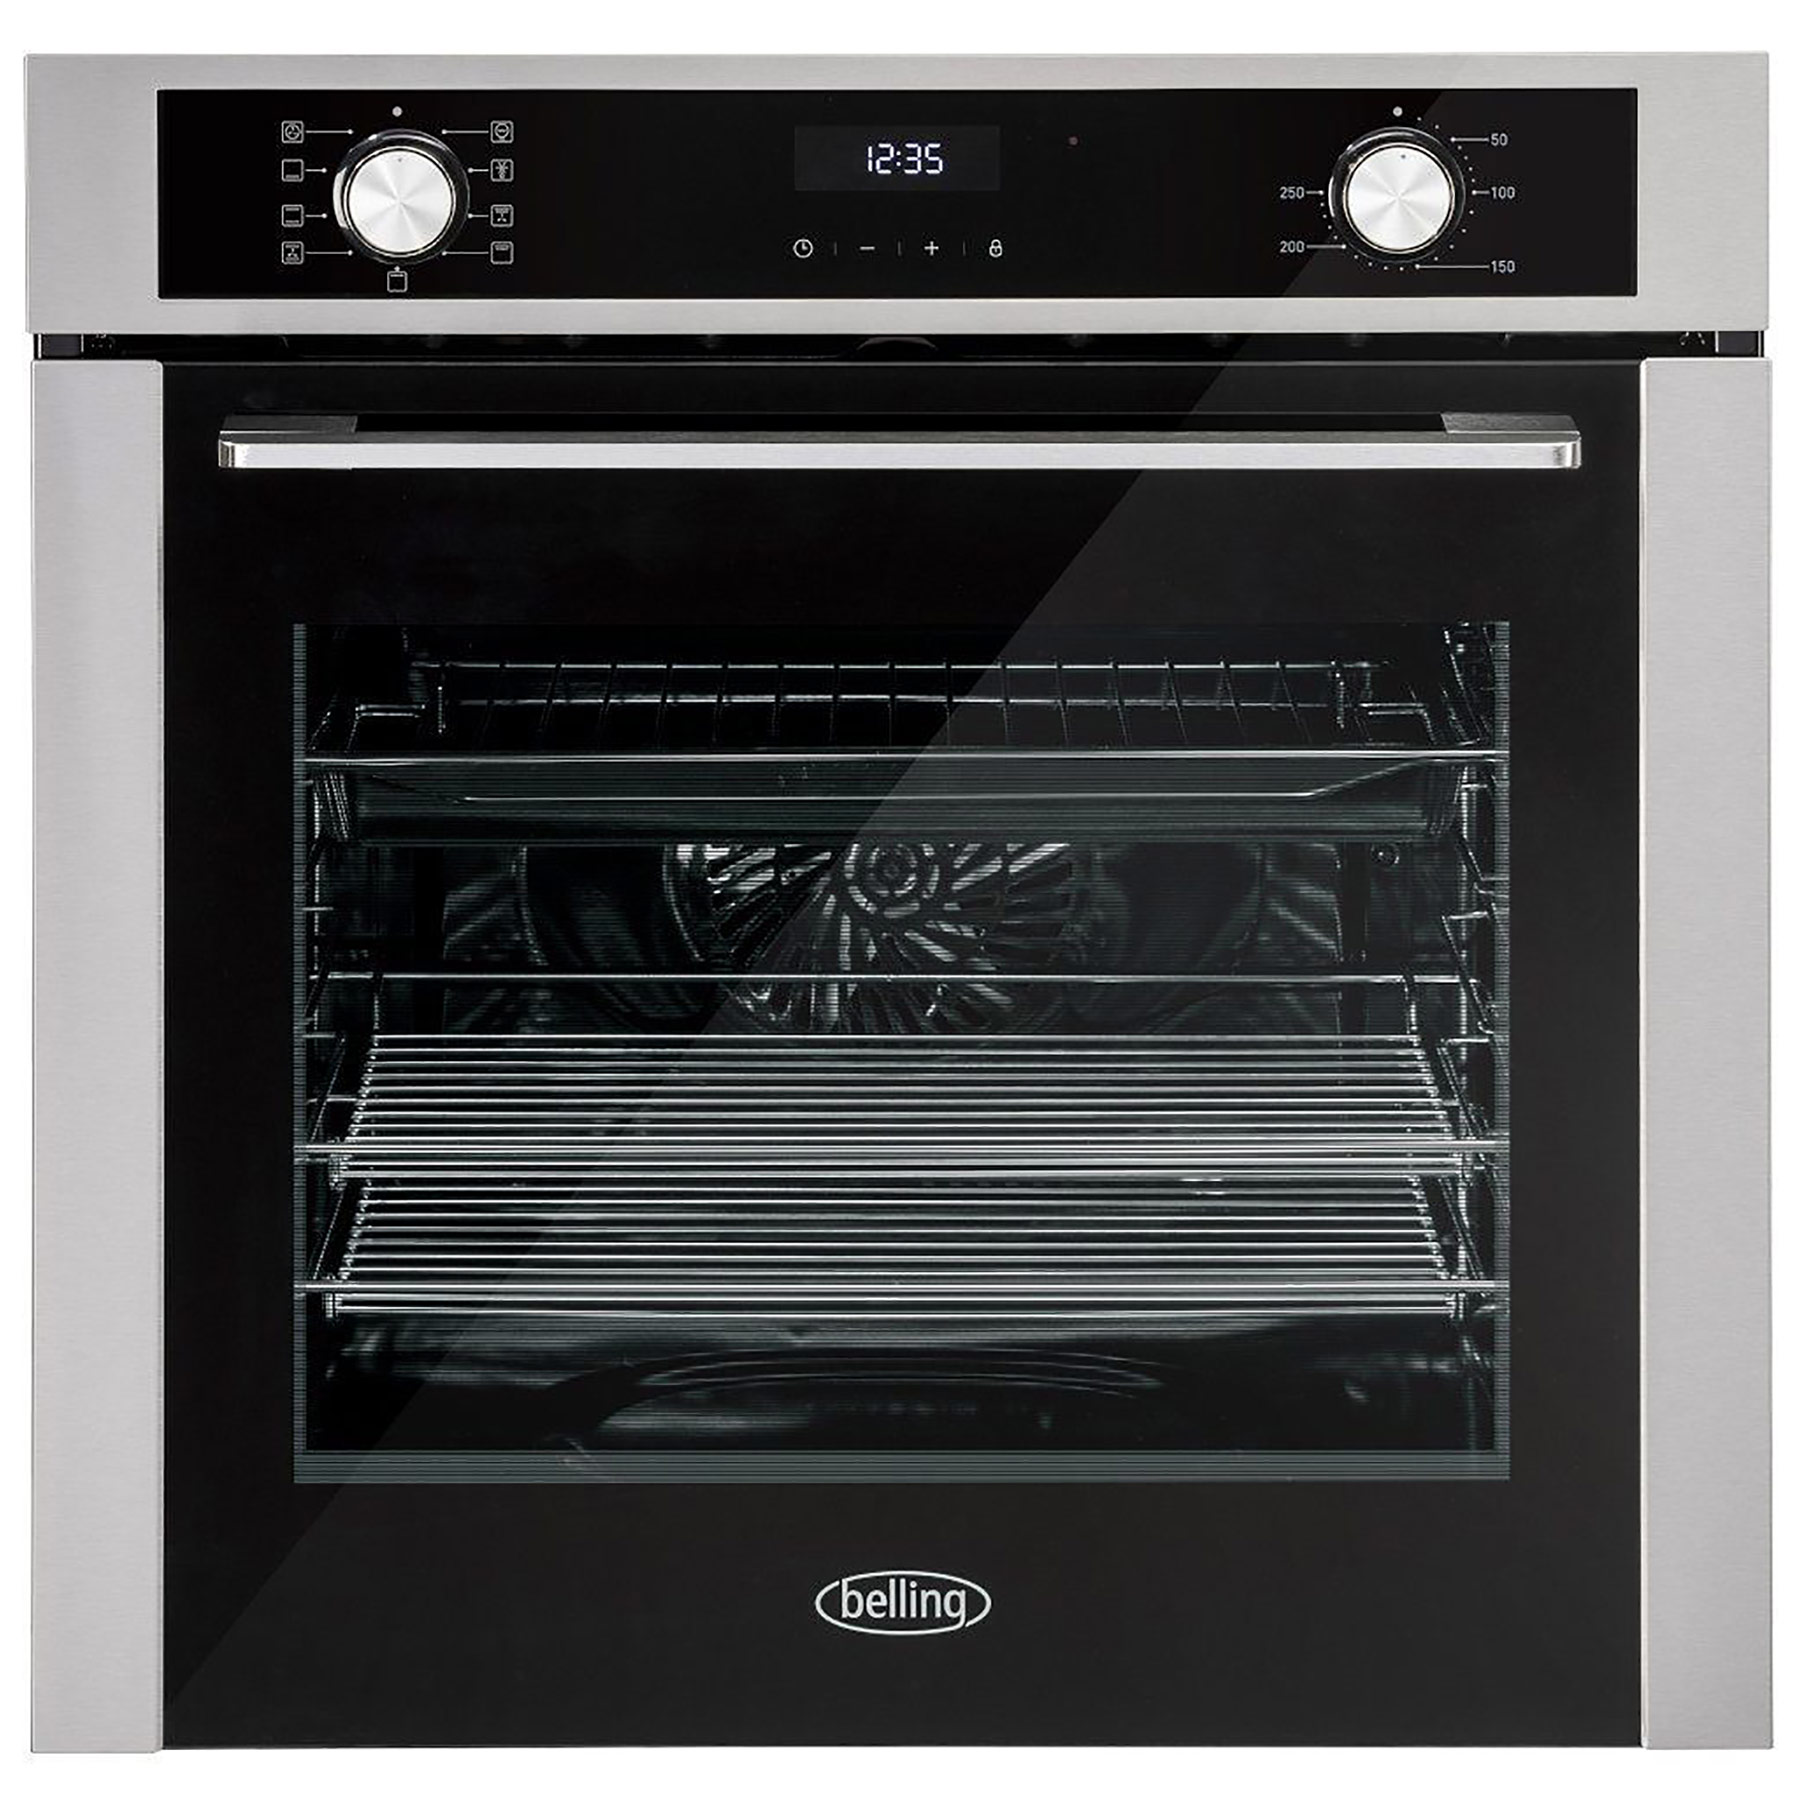 Image of Belling 444411399 Built In Electric Single Oven in St Steel 72L